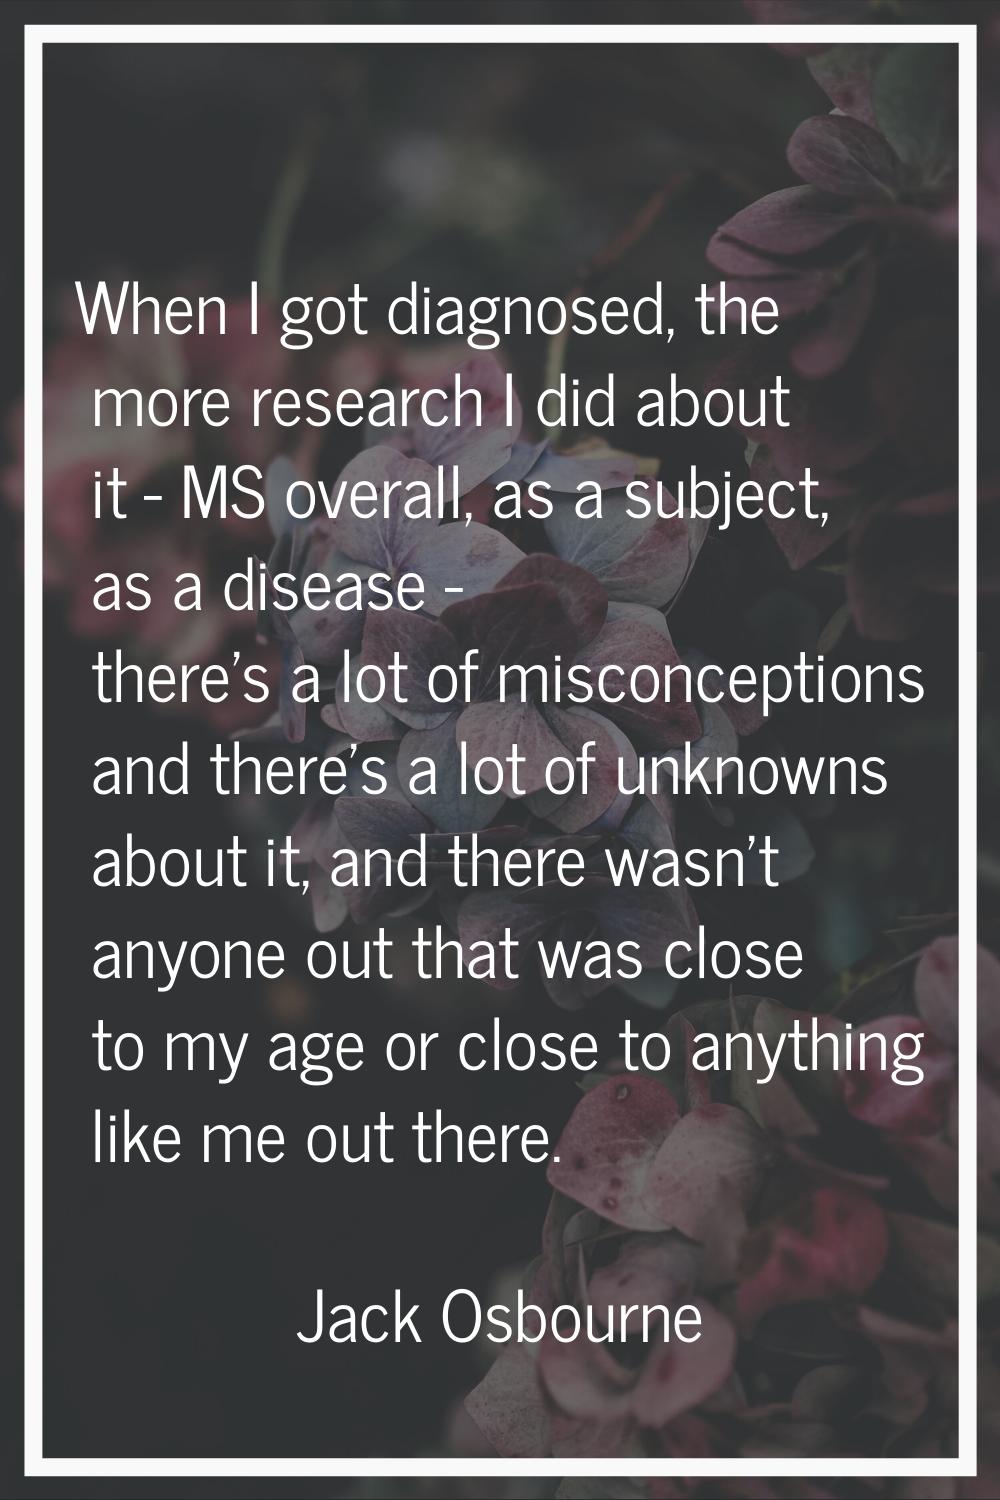 When I got diagnosed, the more research I did about it - MS overall, as a subject, as a disease - t